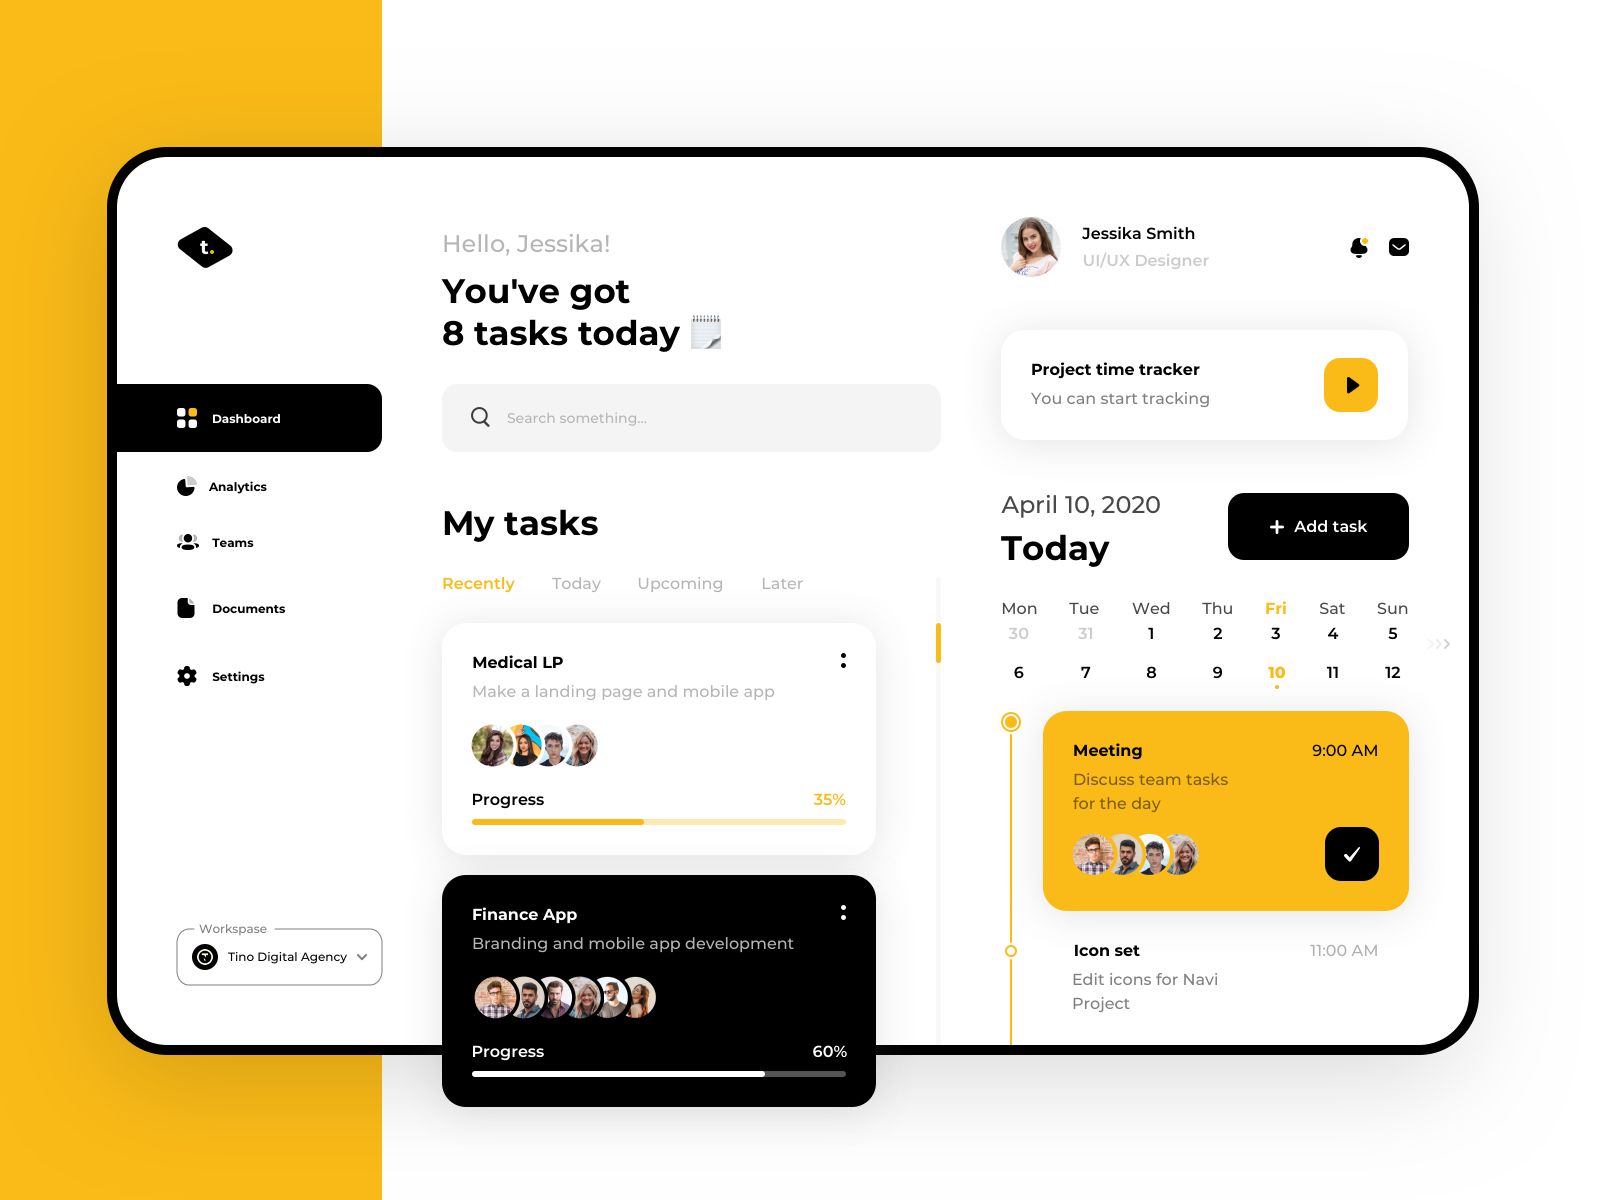 Make sure to research all possible service options that there are on the market before choosing between custom and ready-to-use tax software (*image by [Anastasia](https://dribbble.com/anastasia-tino){ rel="nofollow" target="_blank" .default-md}*)